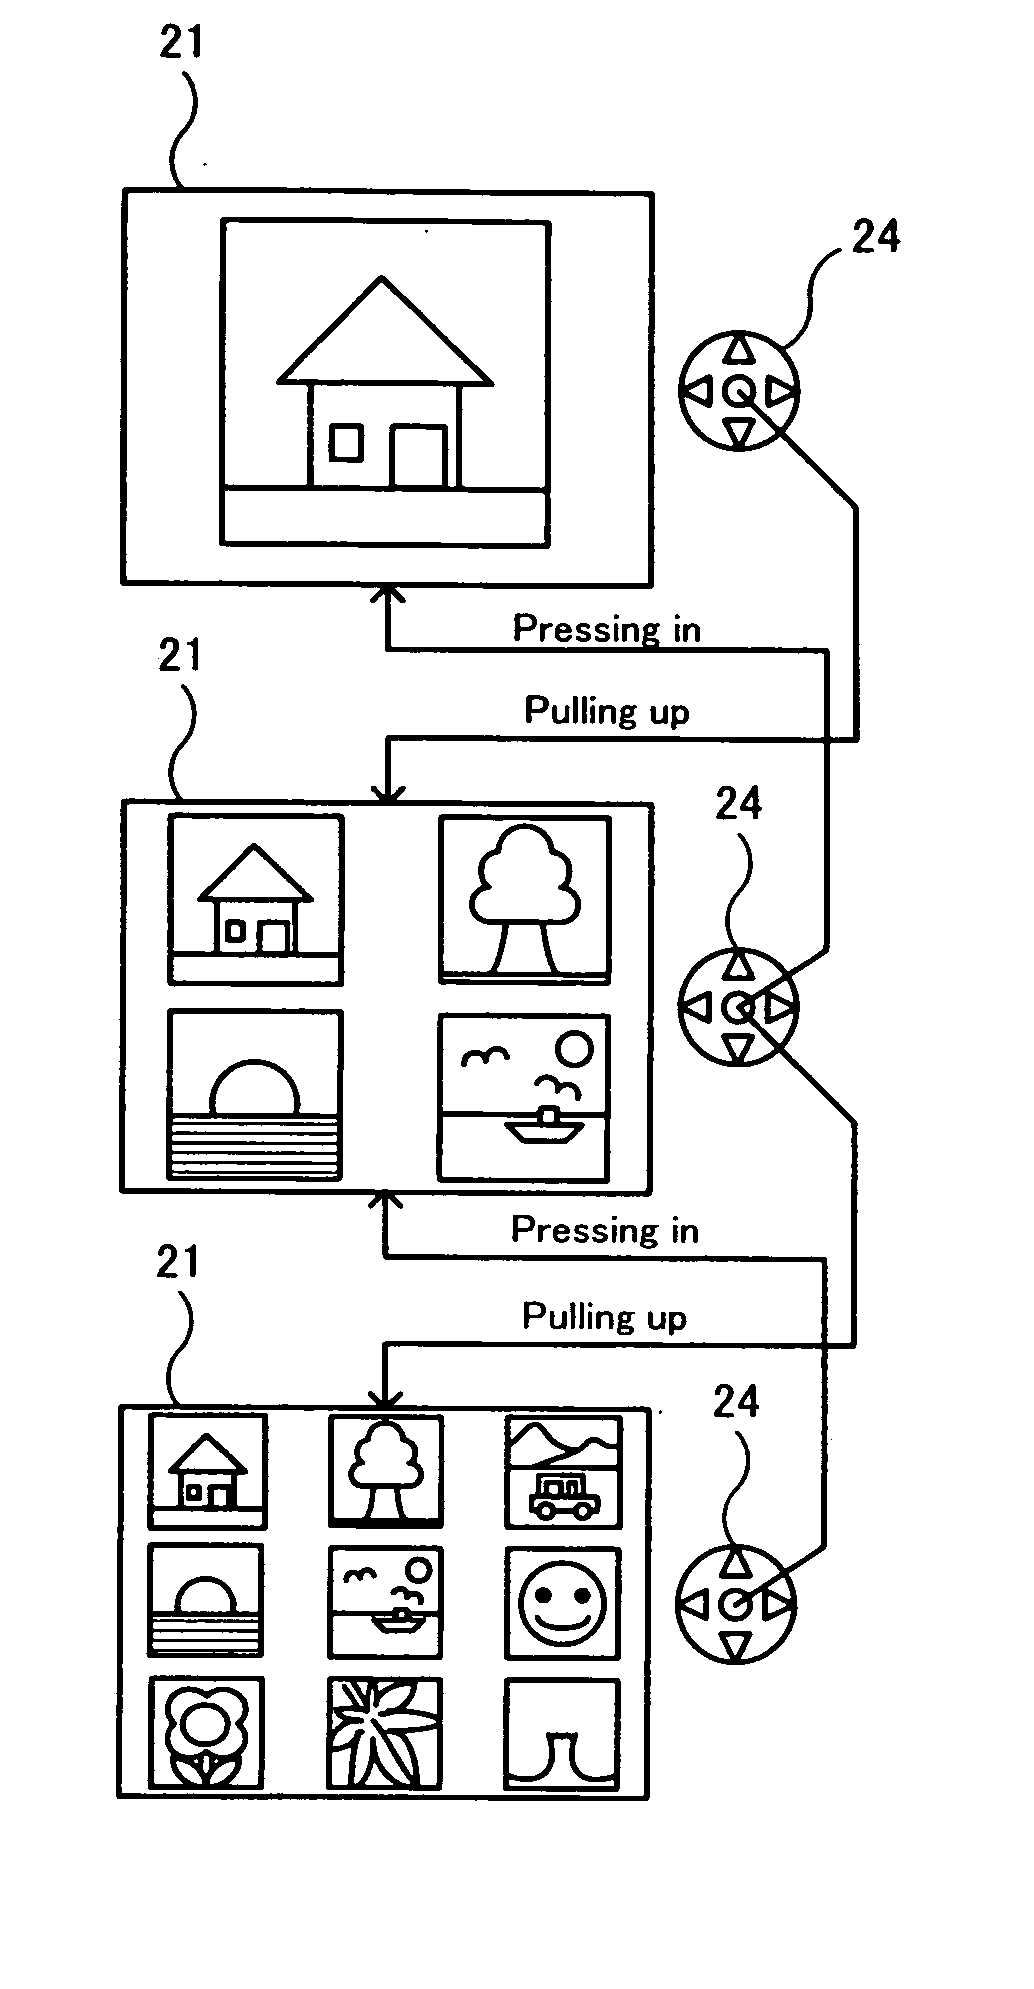 Apparatus for displaying an image